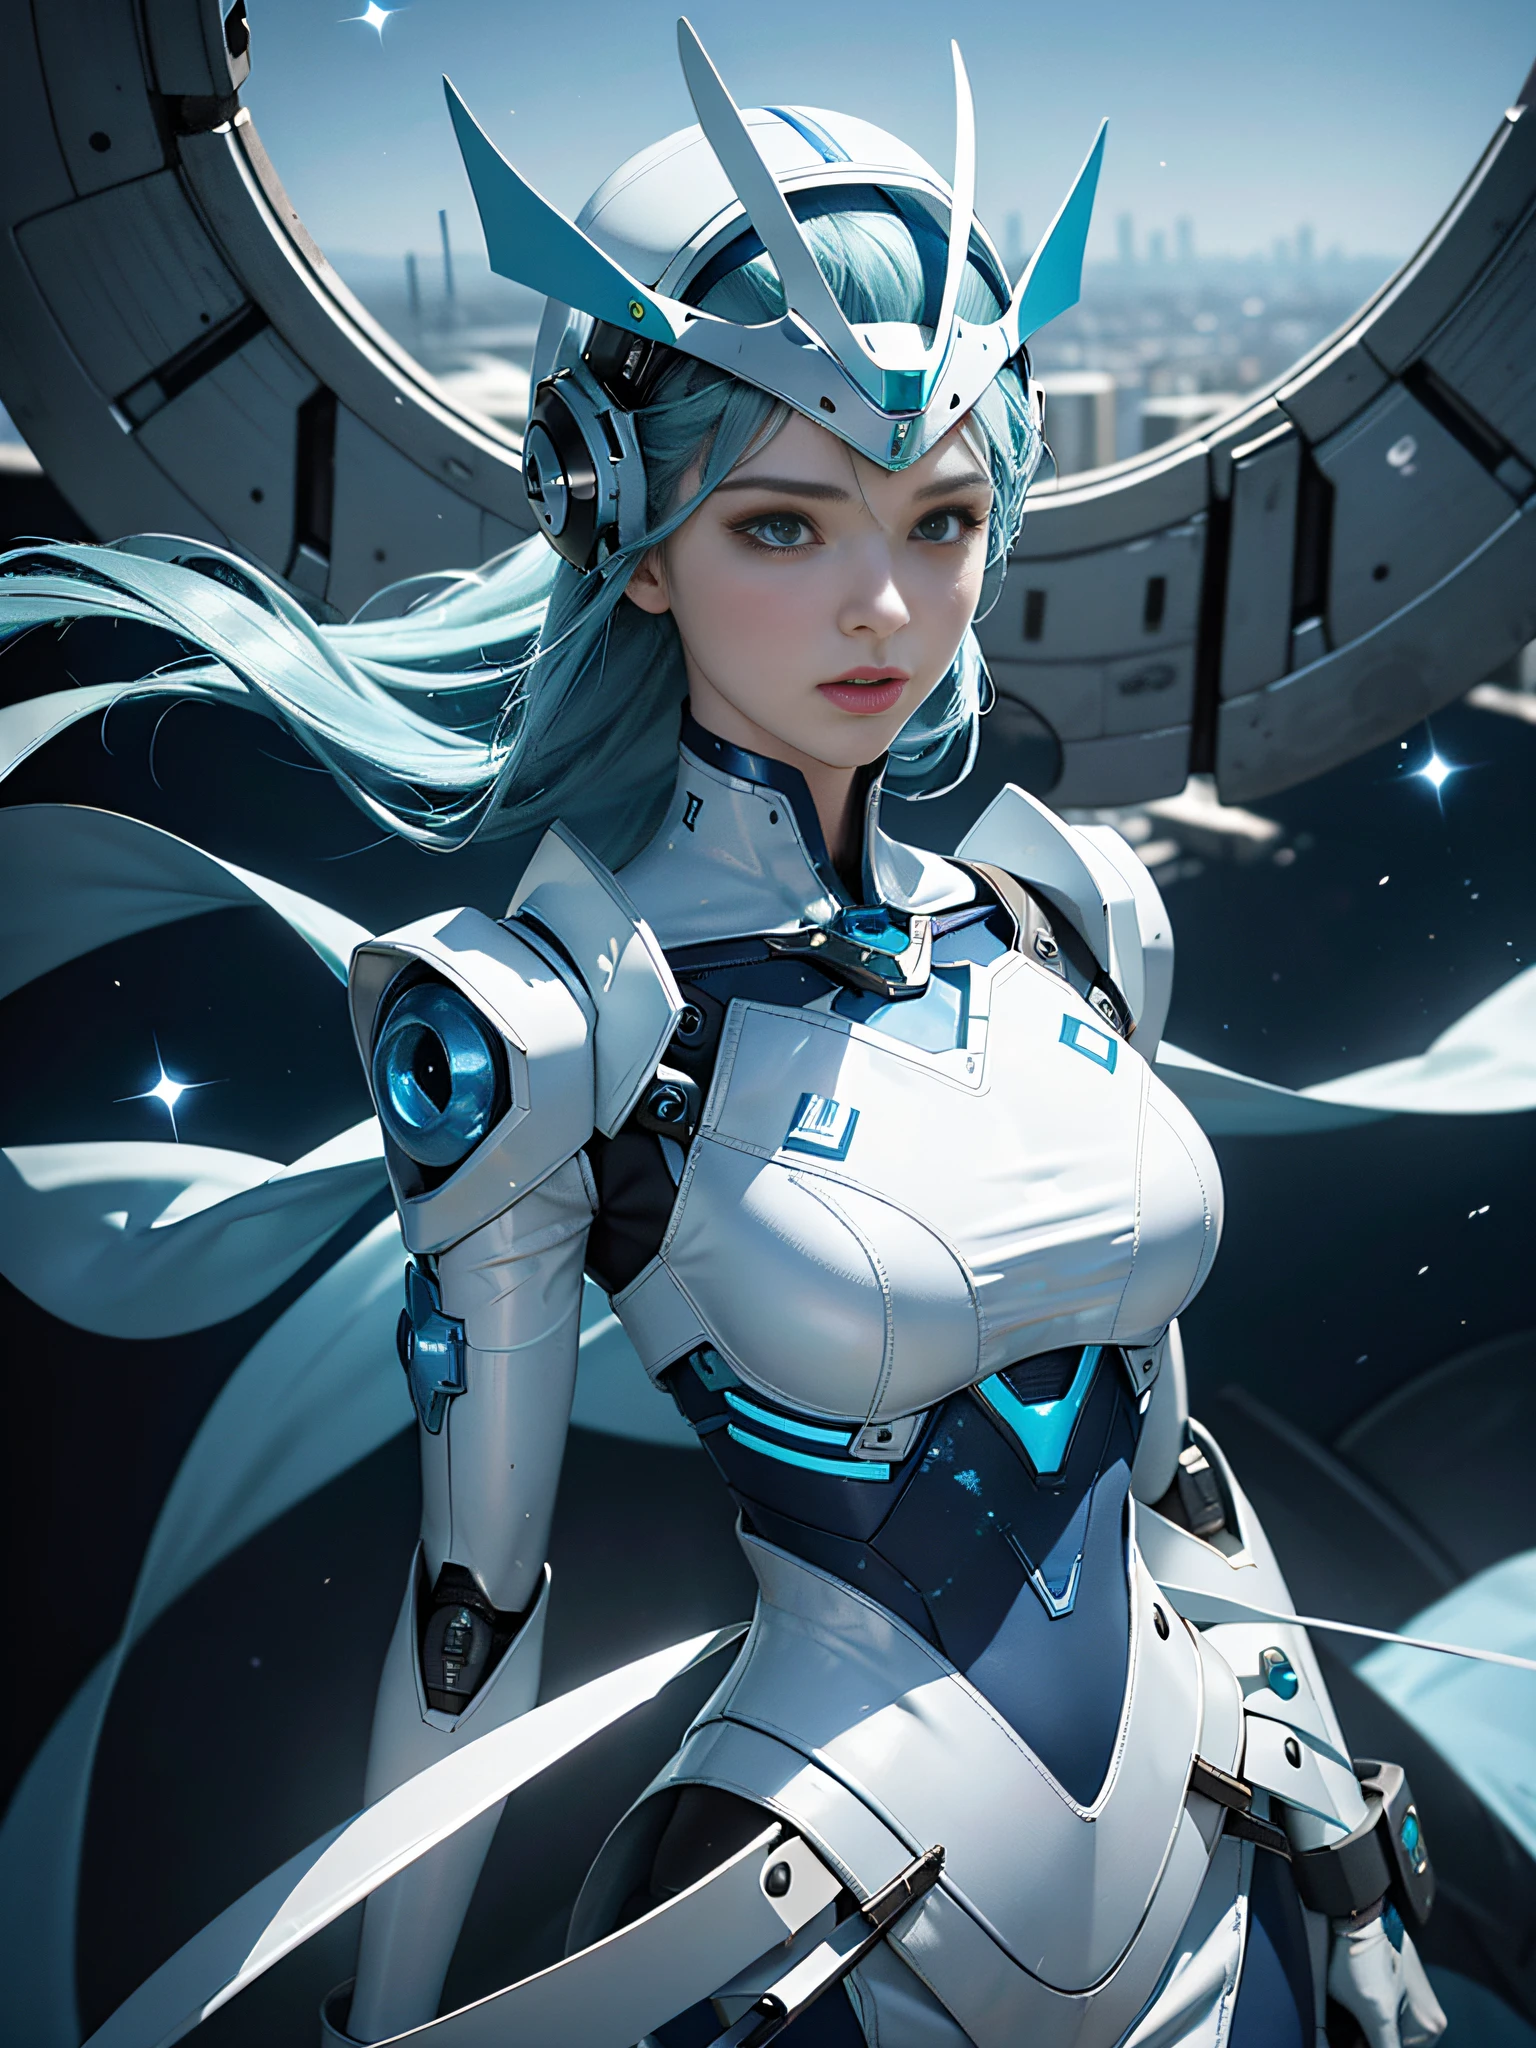 (Masterpiece,Best quality),robot,Upper body blue white metal,Main lower body white metal,There is a circular green glowing part on the chest,There are two folding knives on the back of the hand,Flying state,When flying,over the city,there are blue particles floating on the back,Wearing a blue and white helmet